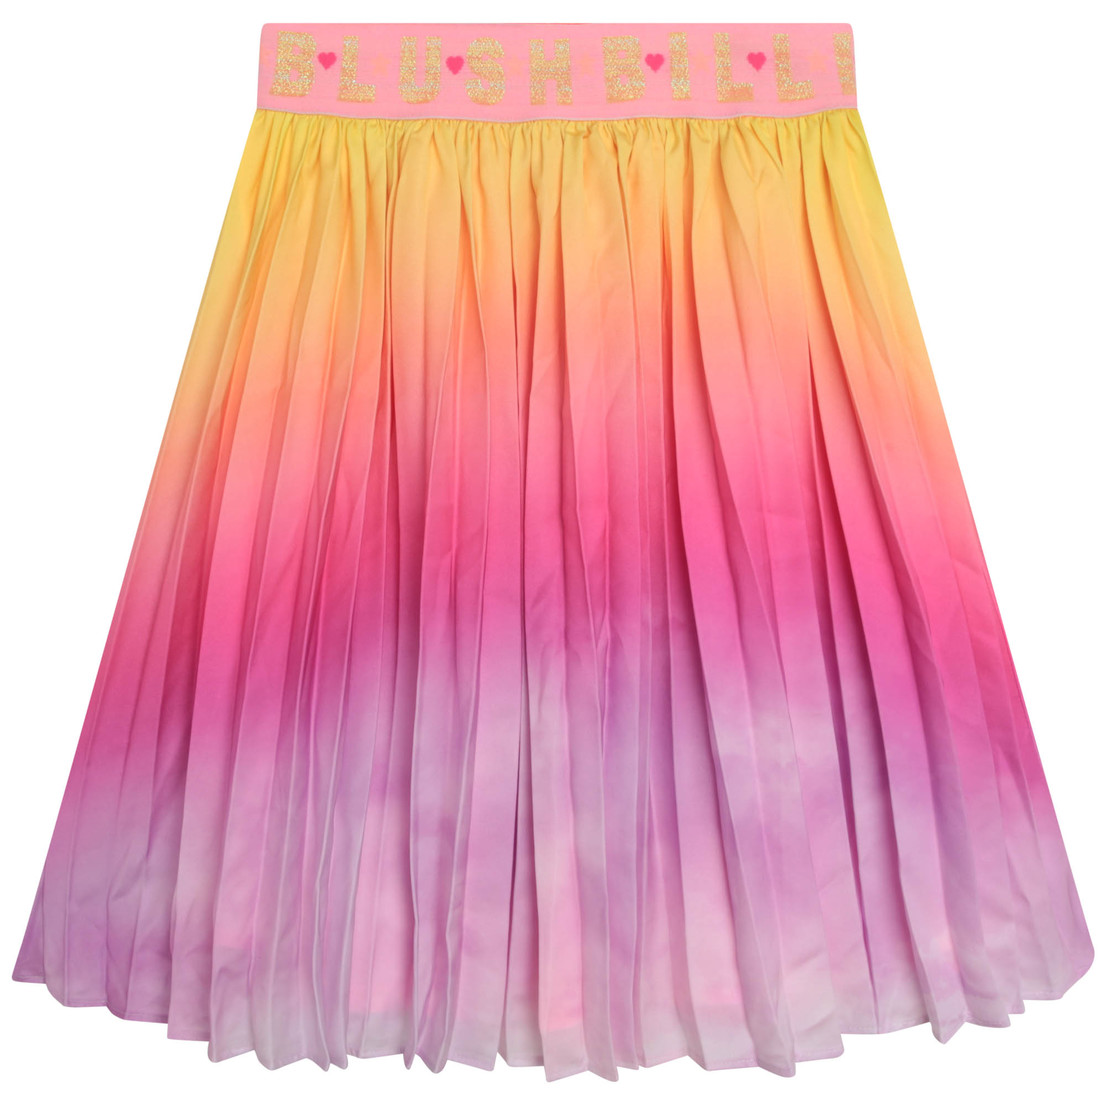 Polyester pleated skirt, gradient allover, lining,